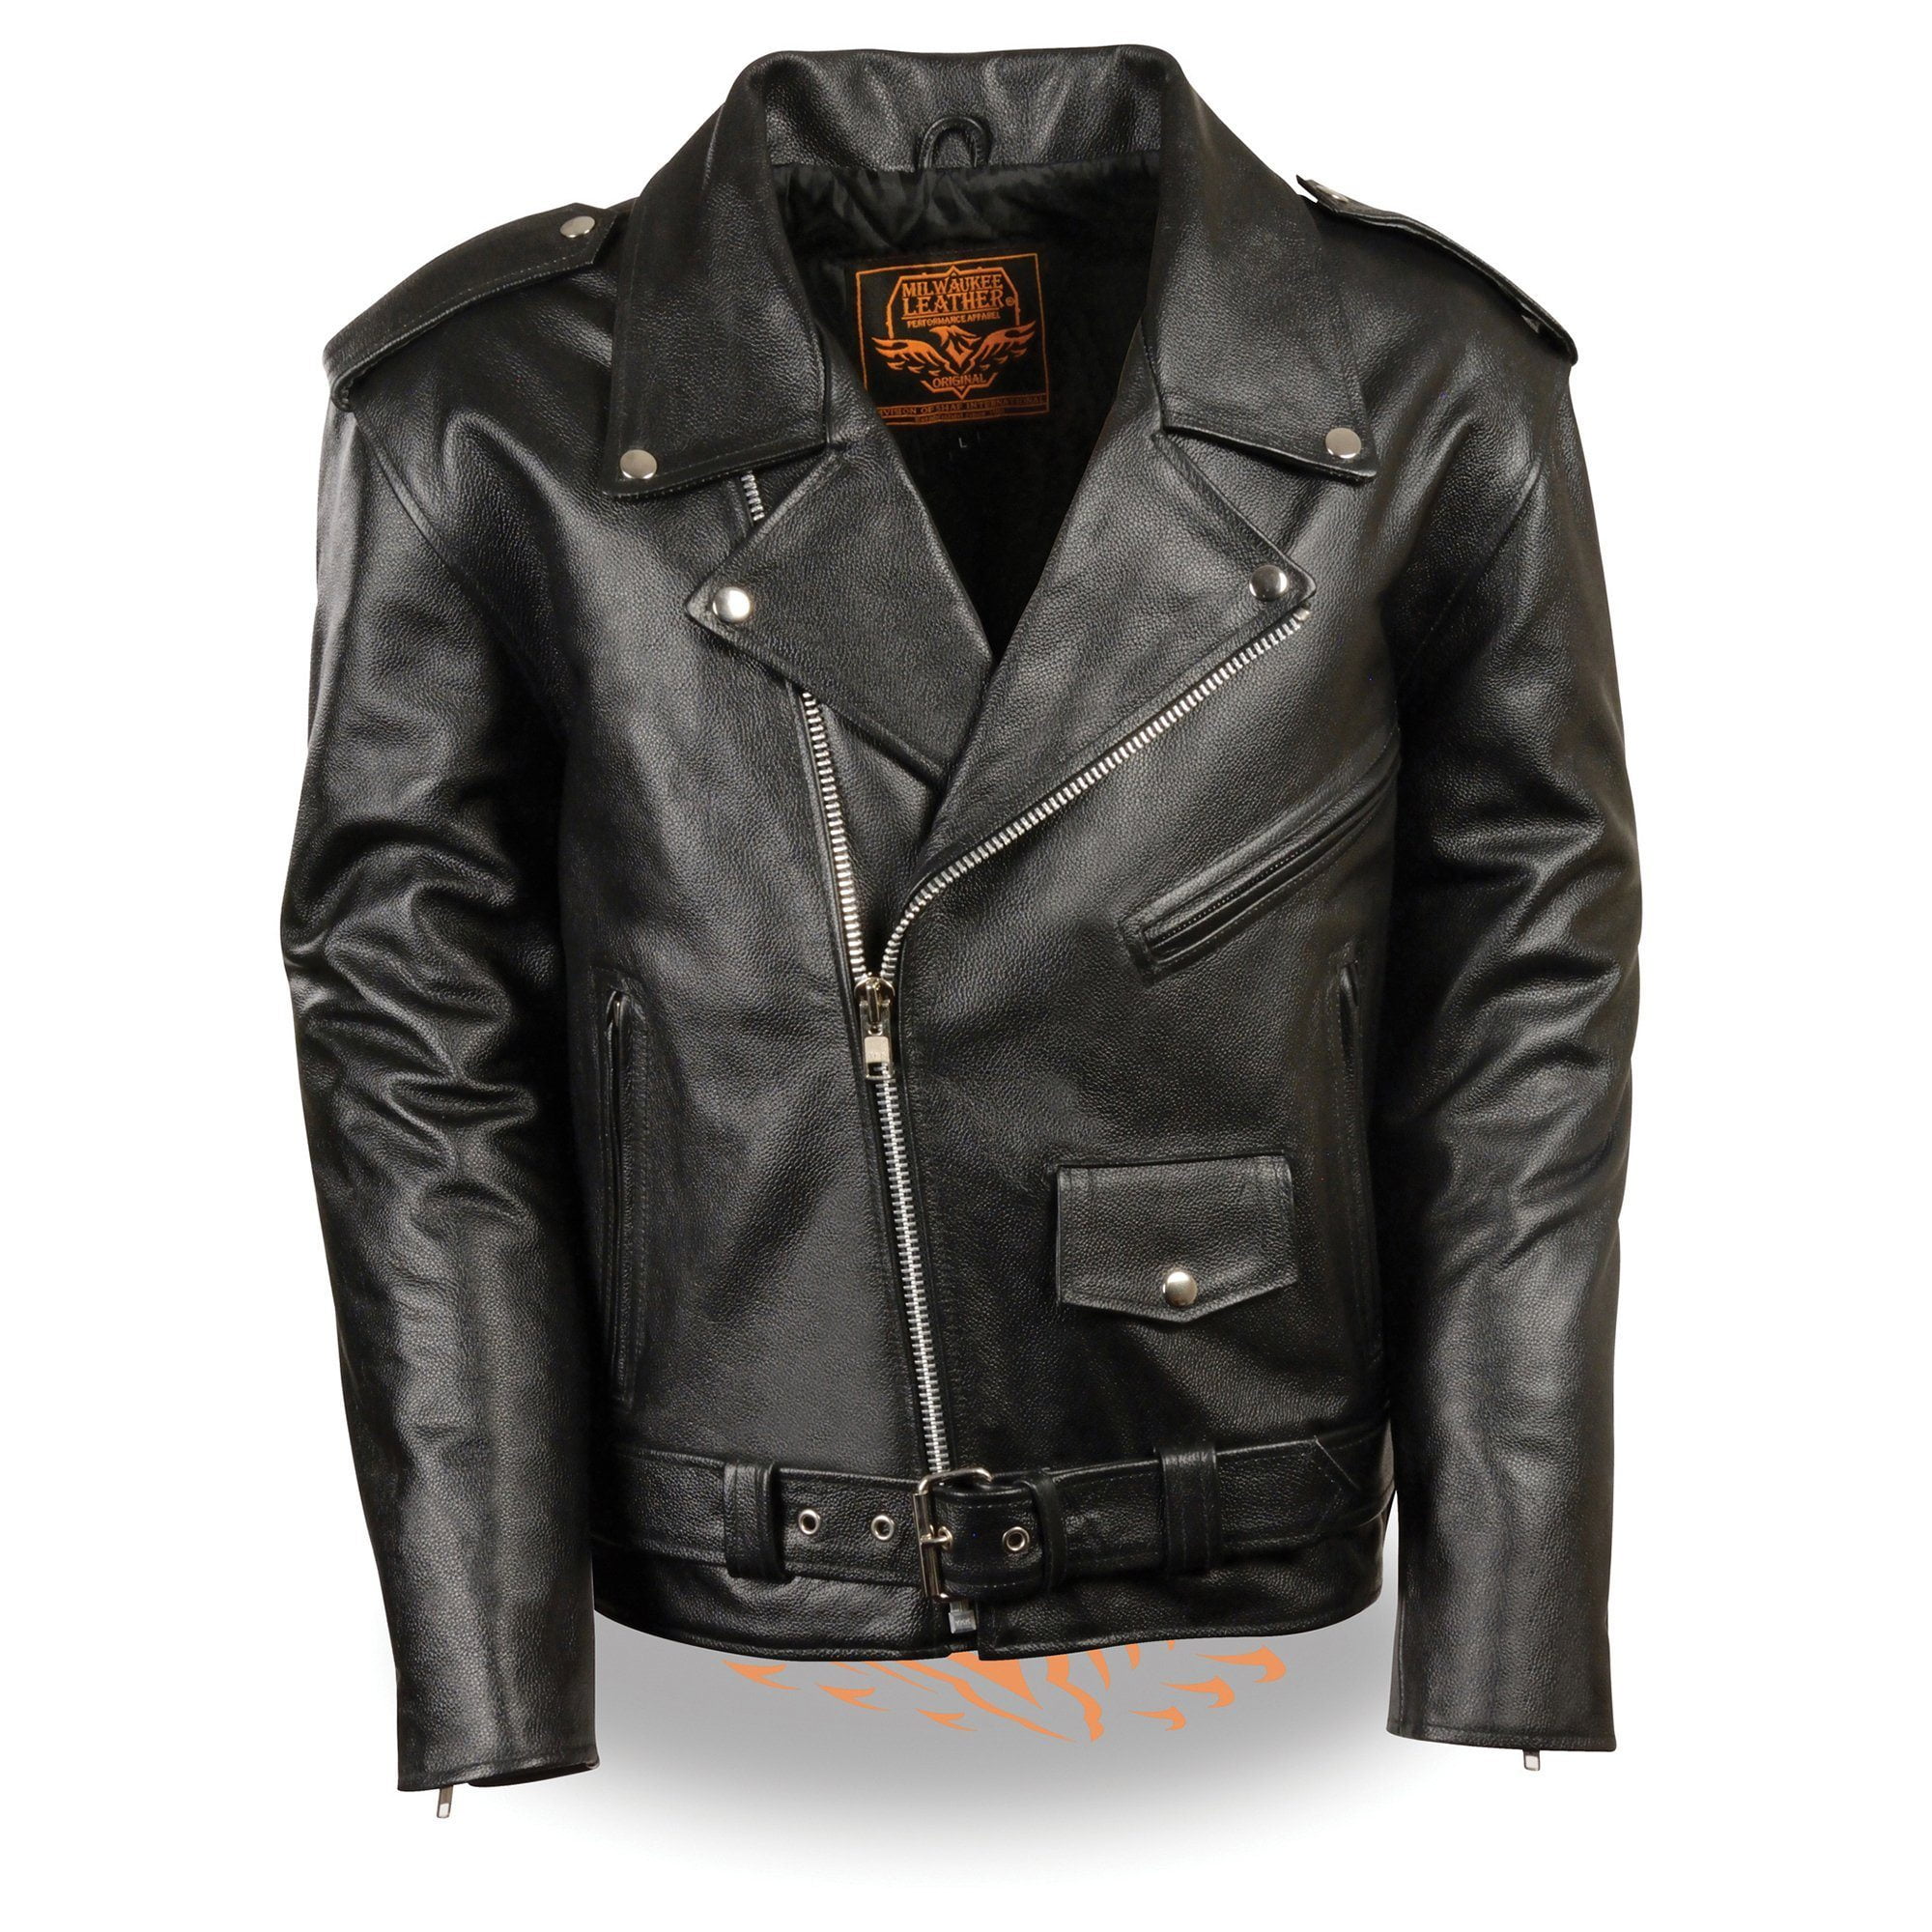 Black, Small Event Biker Leather Mens Basic Motorcycle Jacket with Pockets